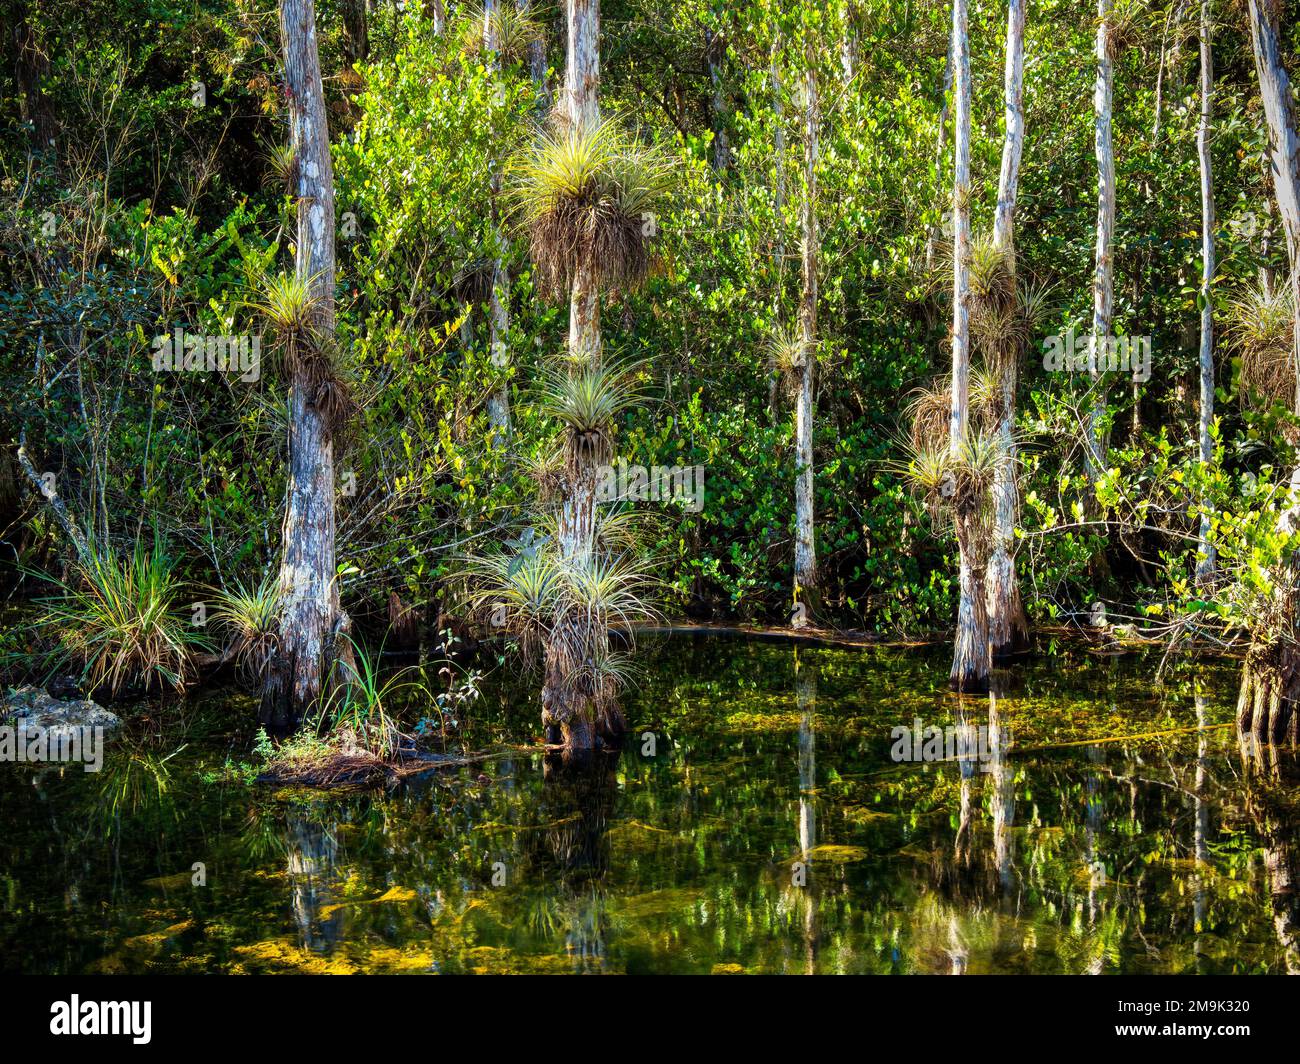 Landscape with swamp and trees, Loop Road, Big Cypress National Preserve, Florida, USA Stock Photo